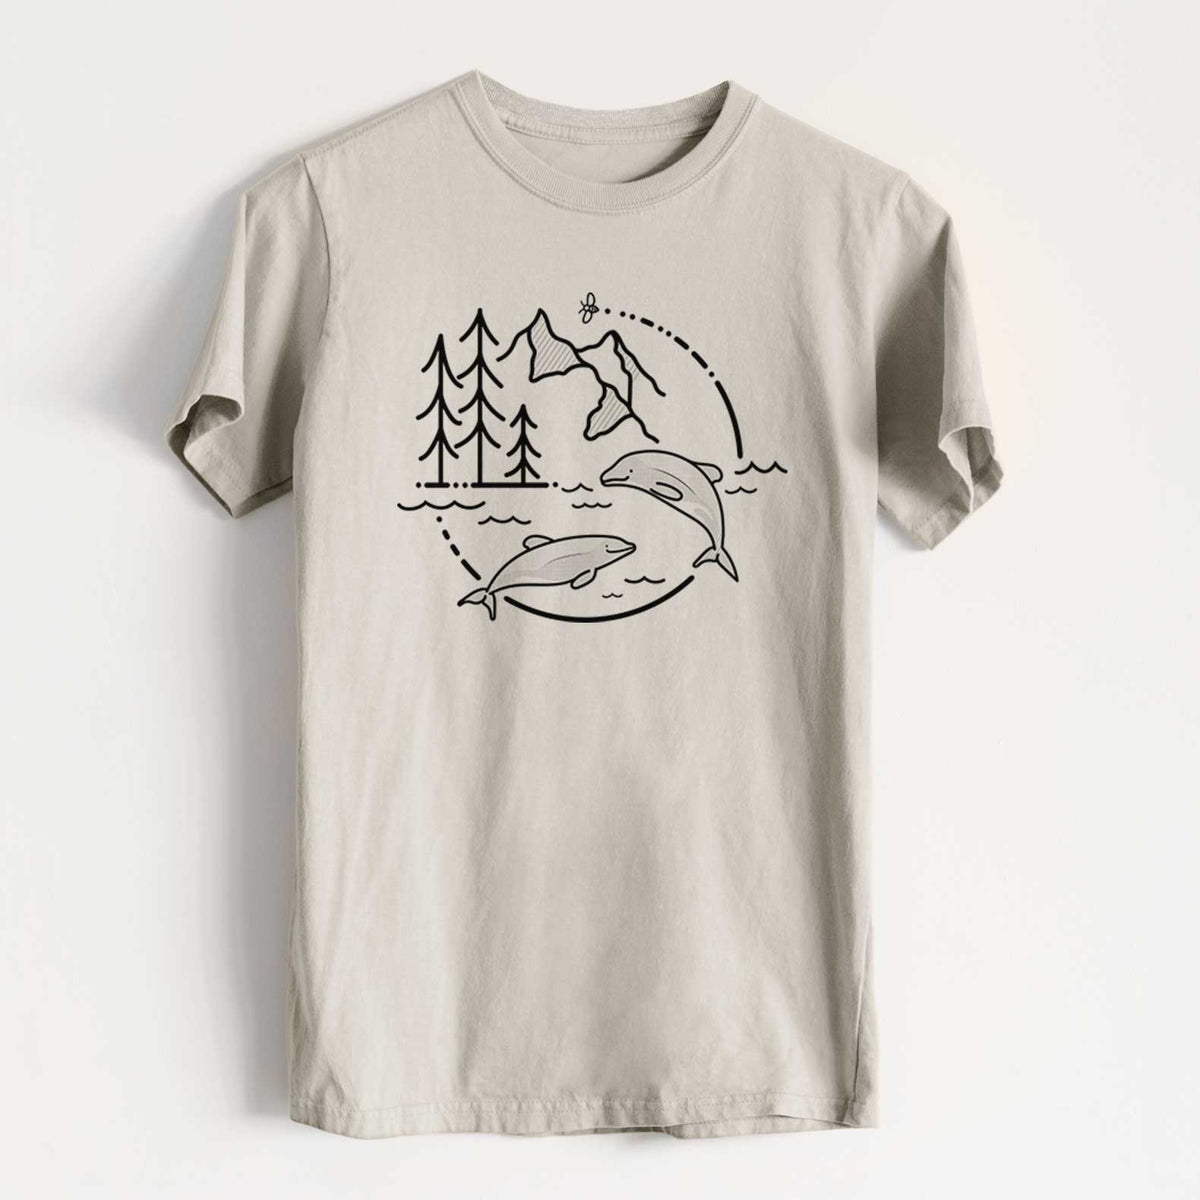 It&#39;s All Connected - Maui Dolphins - Heavyweight Men&#39;s 100% Organic Cotton Tee